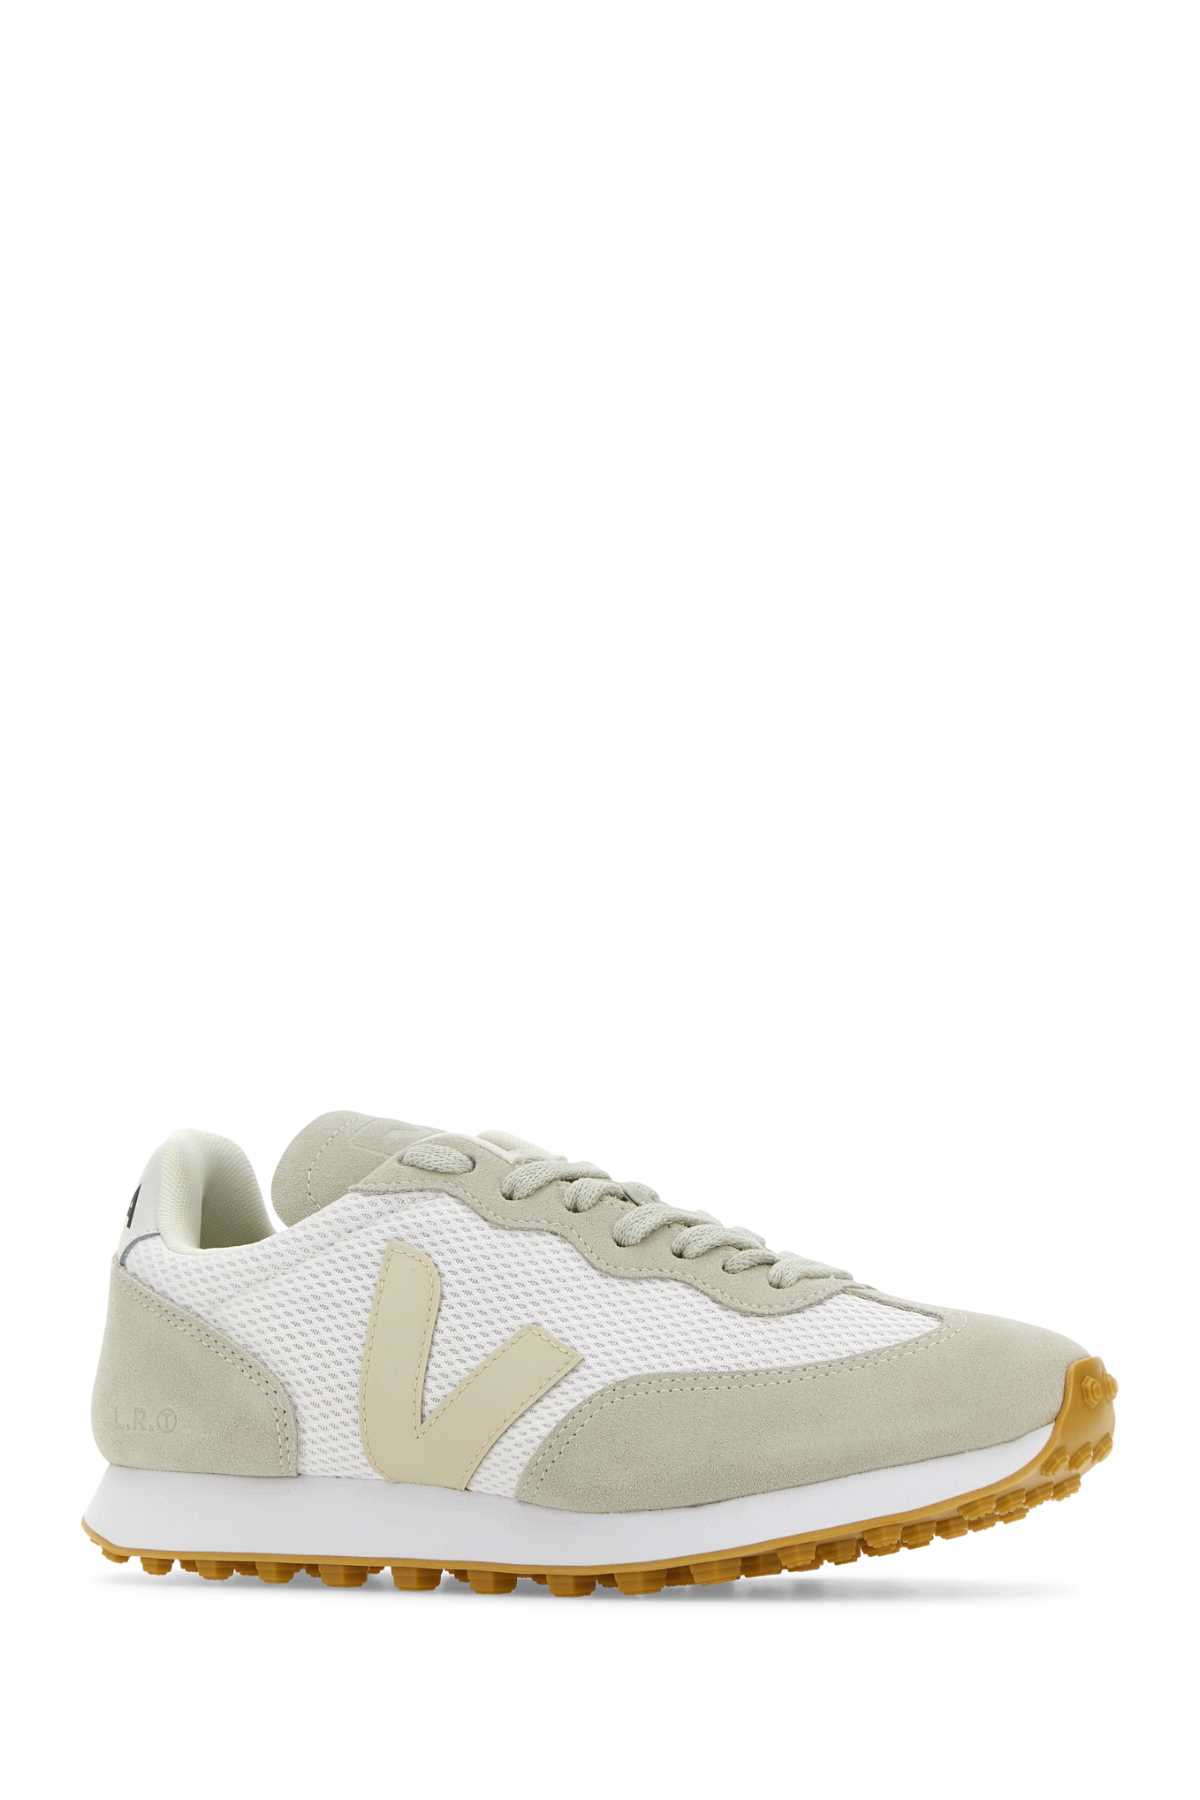 Veja Two-tones Polyester And Suede Rio Branco Sneakers In Whitepierrenatural